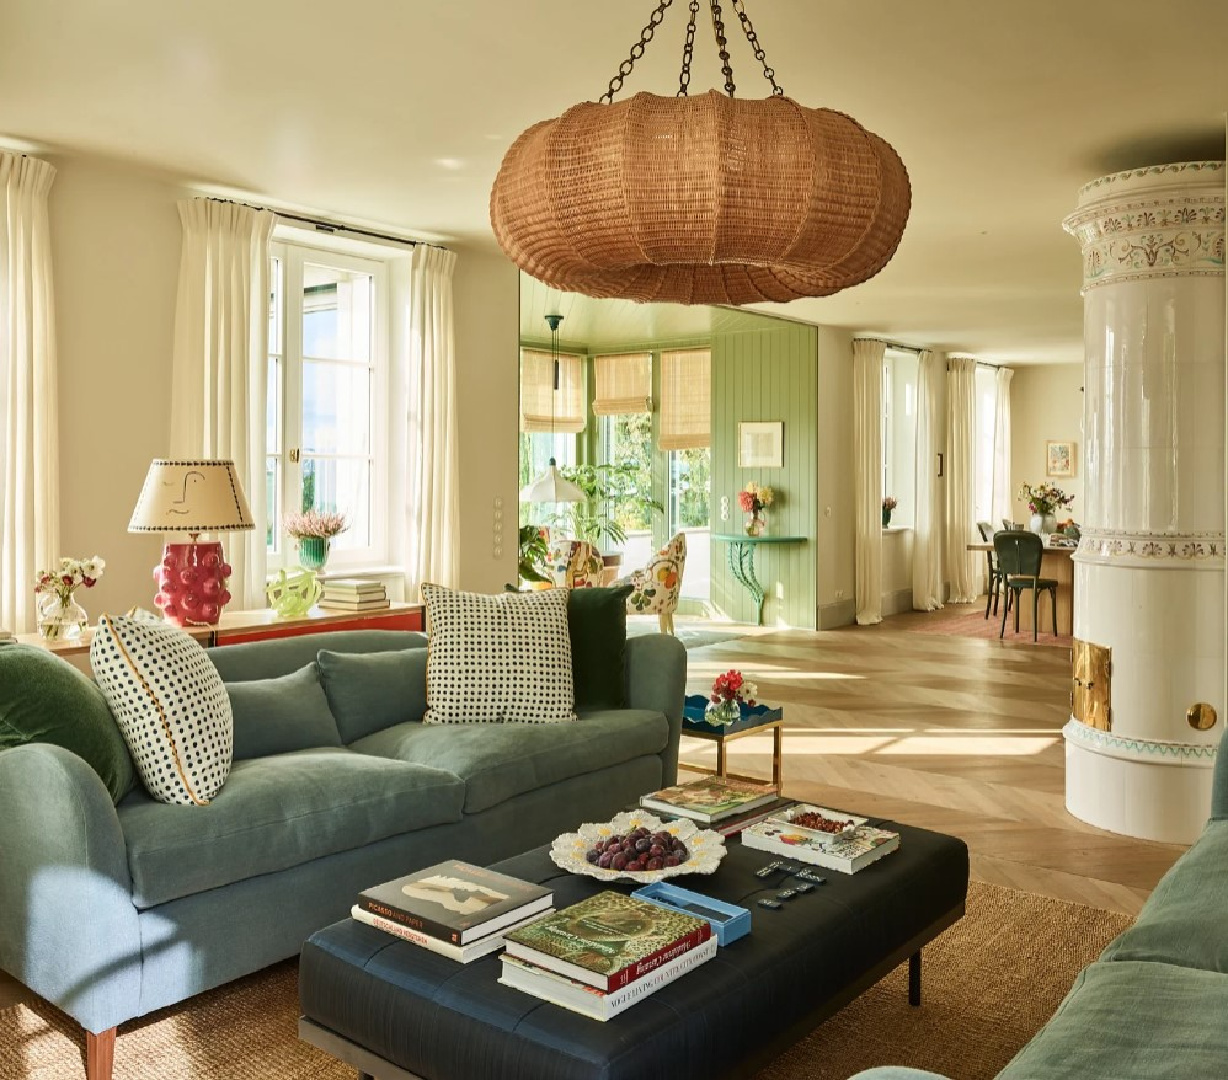 Gorgeous and whimsical living space with design by Beata Heuman; photo: Robert Reiger.